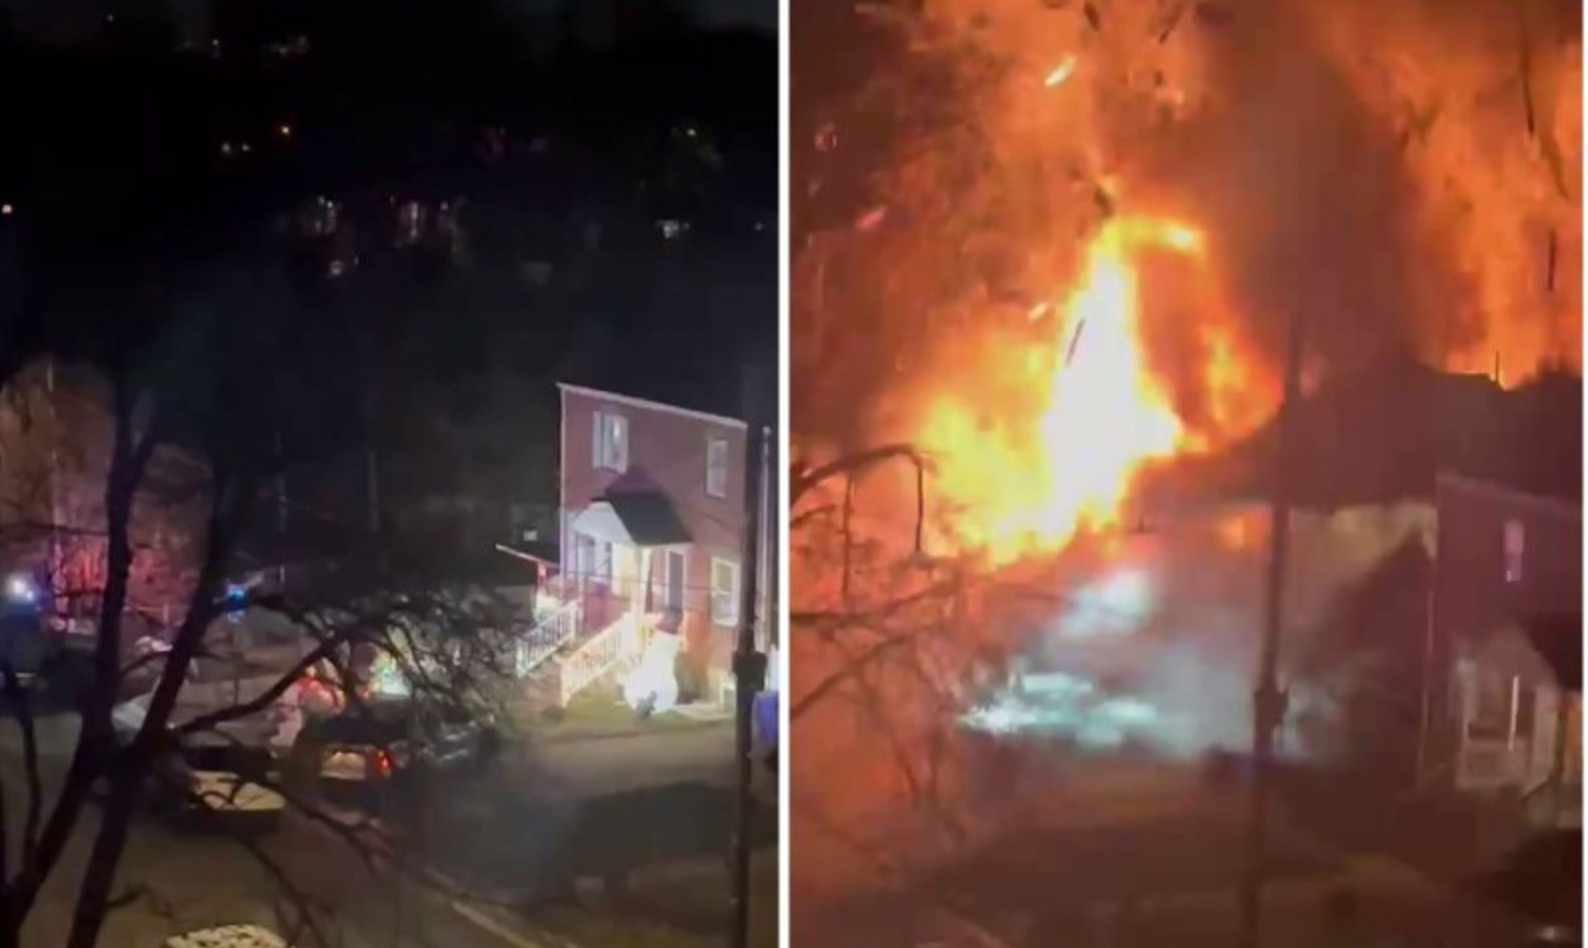 Man Seemingly Explodes House With Himself Inside During Standoff with Cops - Watch Video